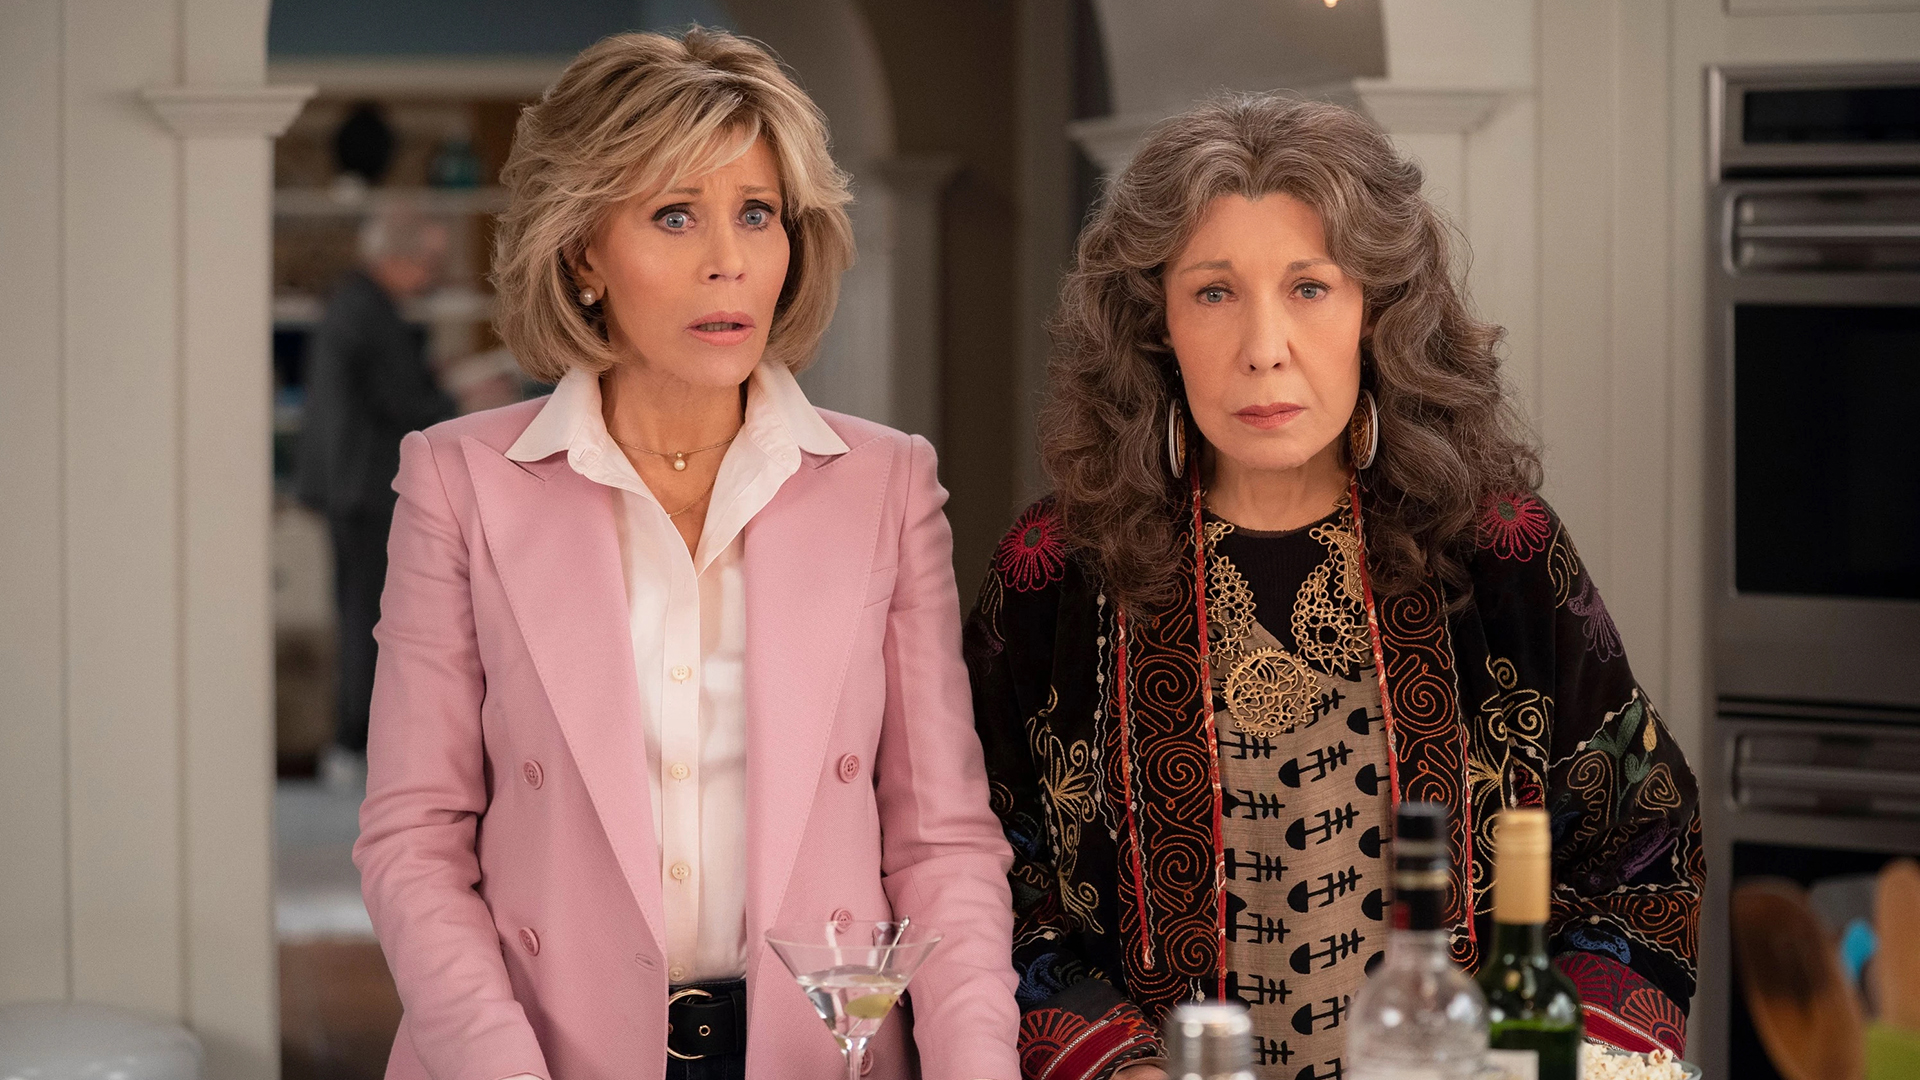 M Ss Ng P Eces Grace And Frankie Season 6 Trailer